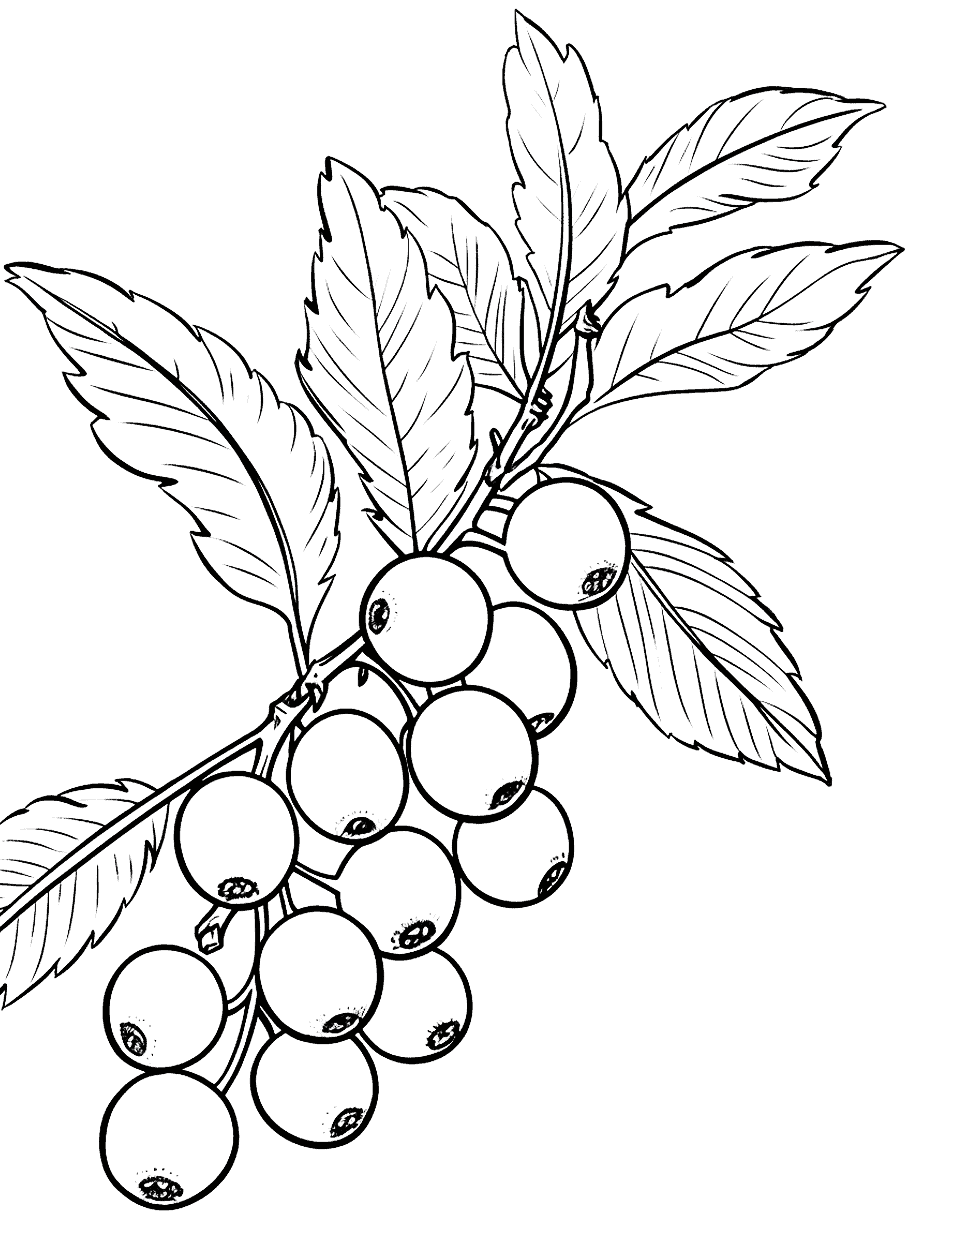 Winter Berries Christmas Coloring Page - A close-up of winter berries.